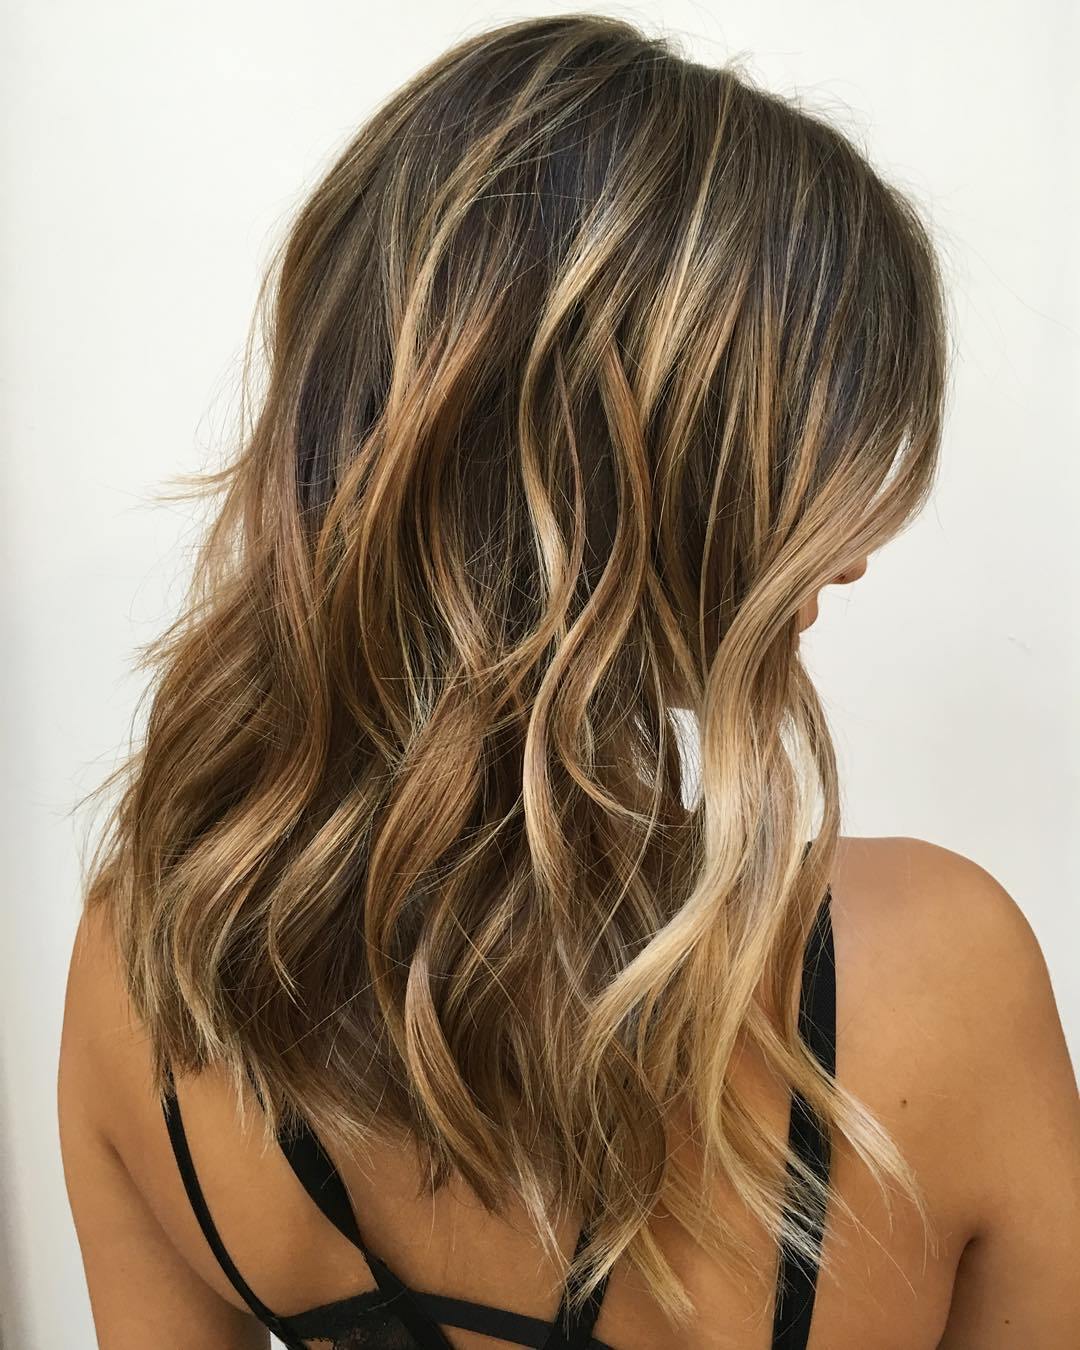 70 Balayage Hair Color Ideas with Blonde, Brown and Caramel Highlights